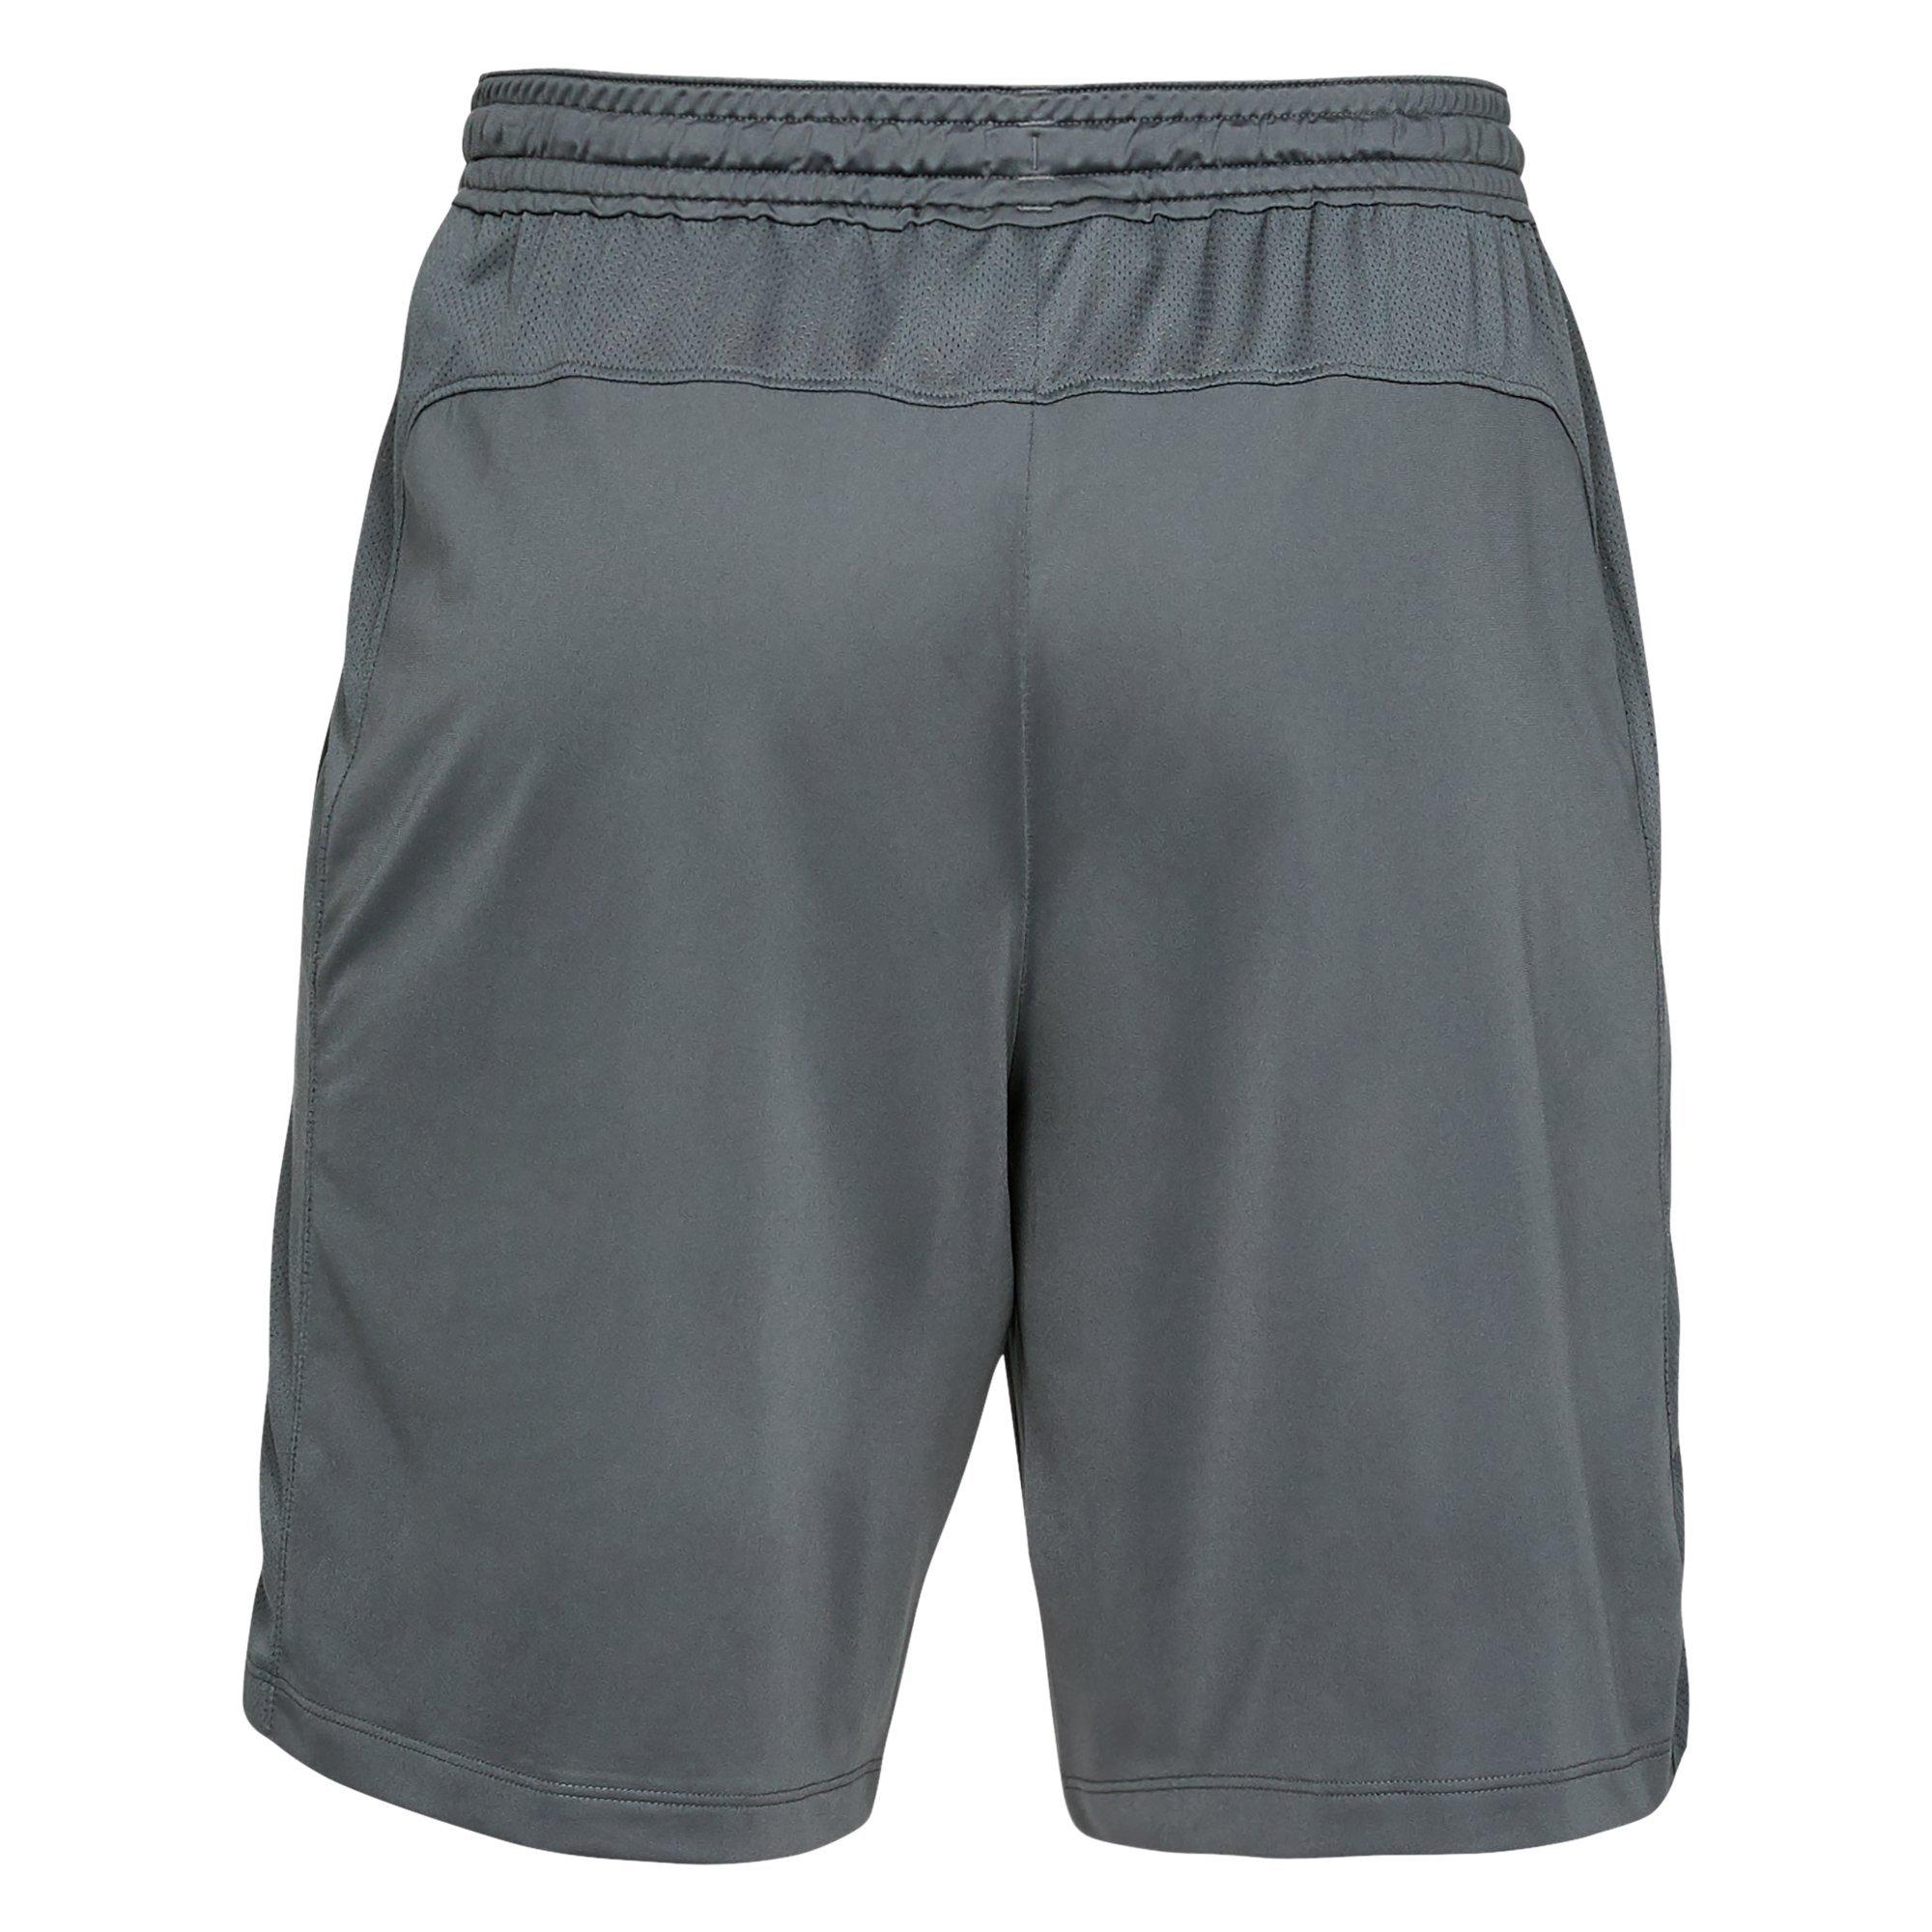 Under Armour Men's MK-1 Shorts Small+Med Charcoal Grey-Black  NEW. 